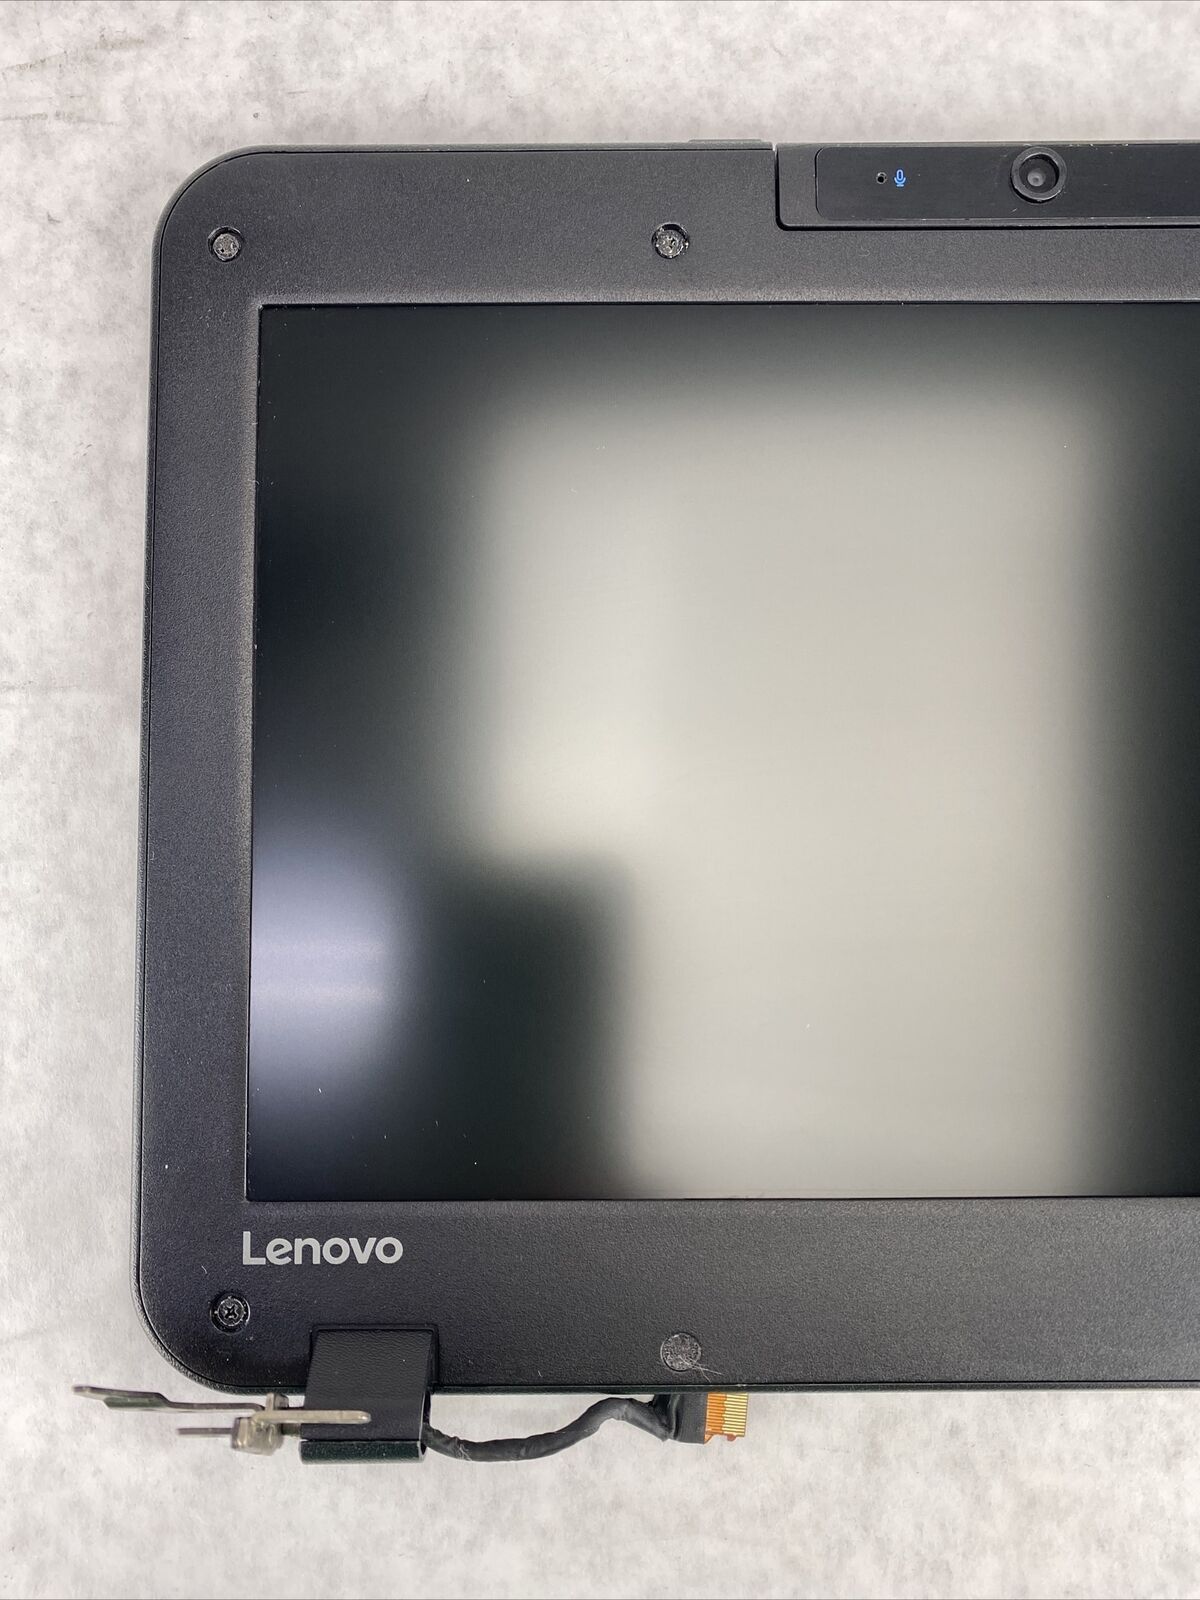 Lot of 5 Lenovo N22 Chromebook 11.6" Touchscreen LCD Panel Complete Assembly